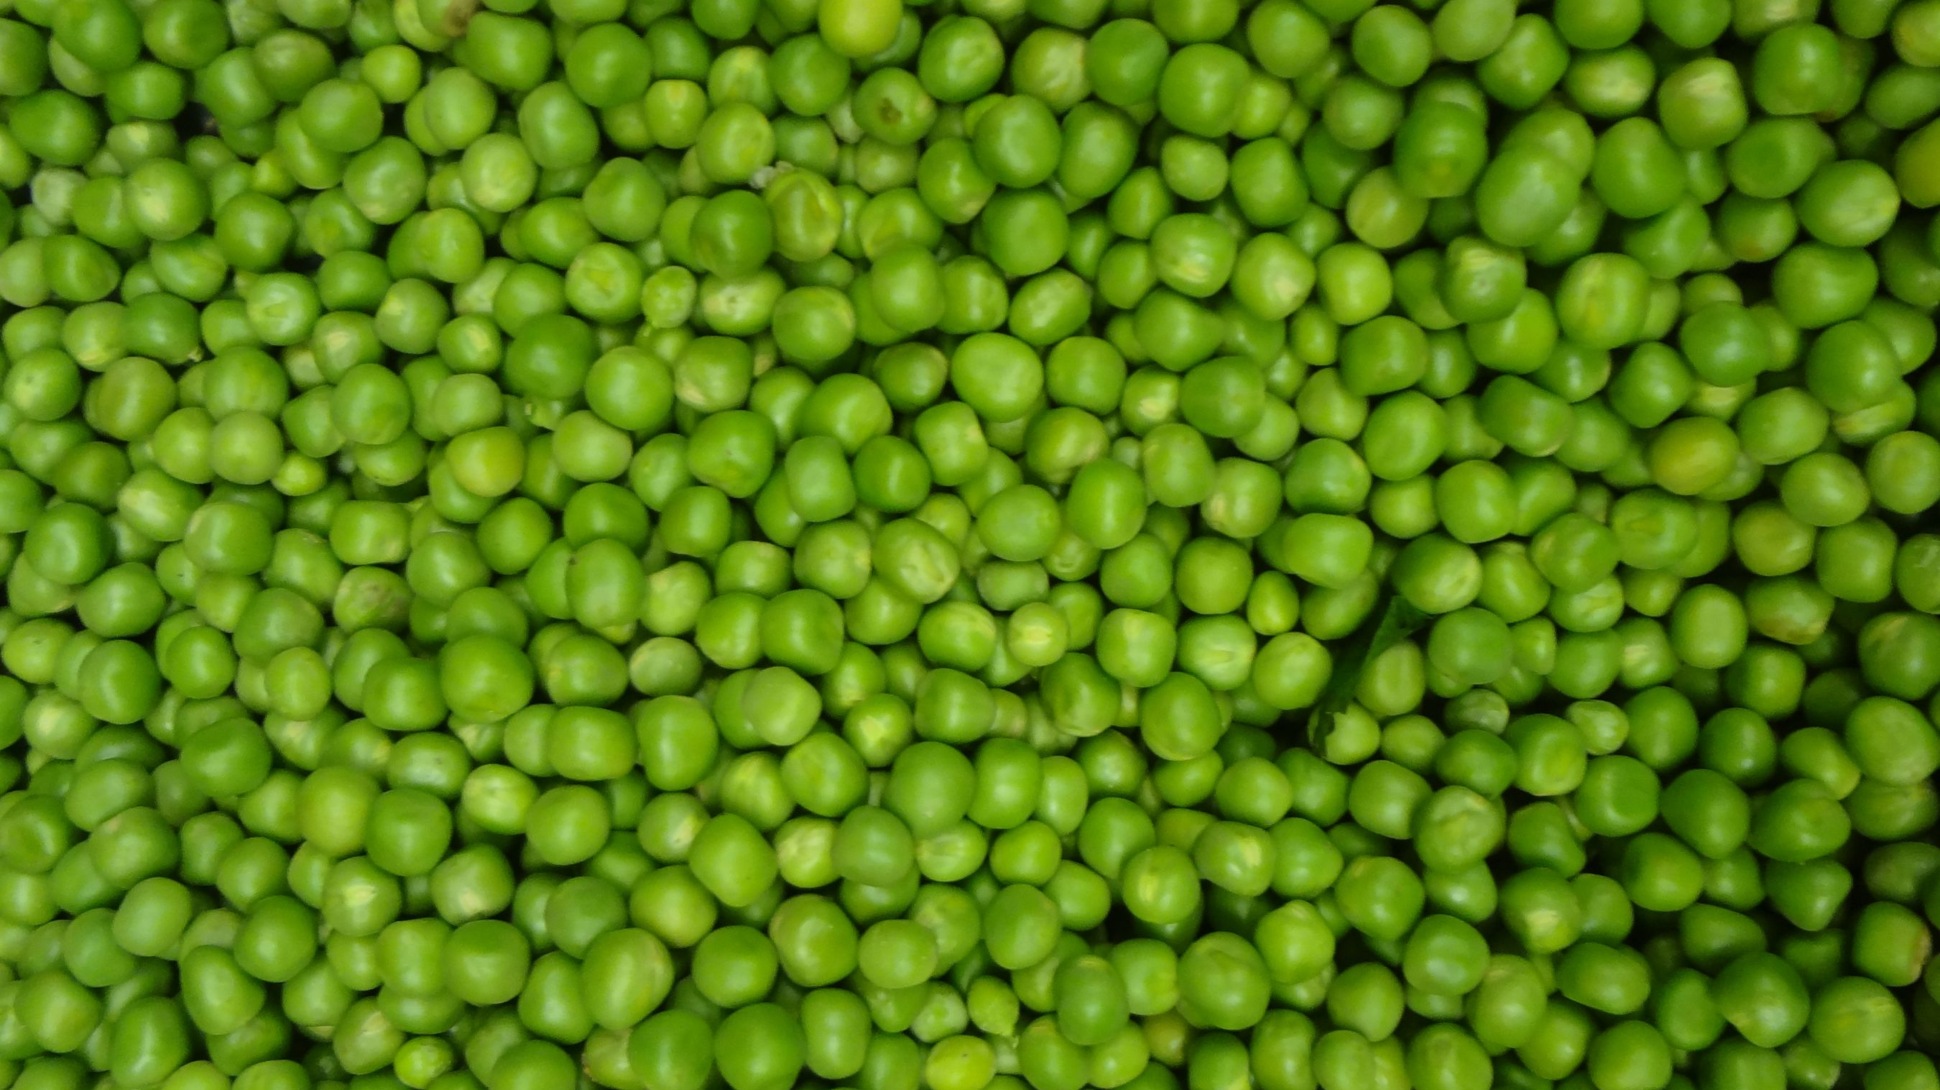 A close up shot of many green peas